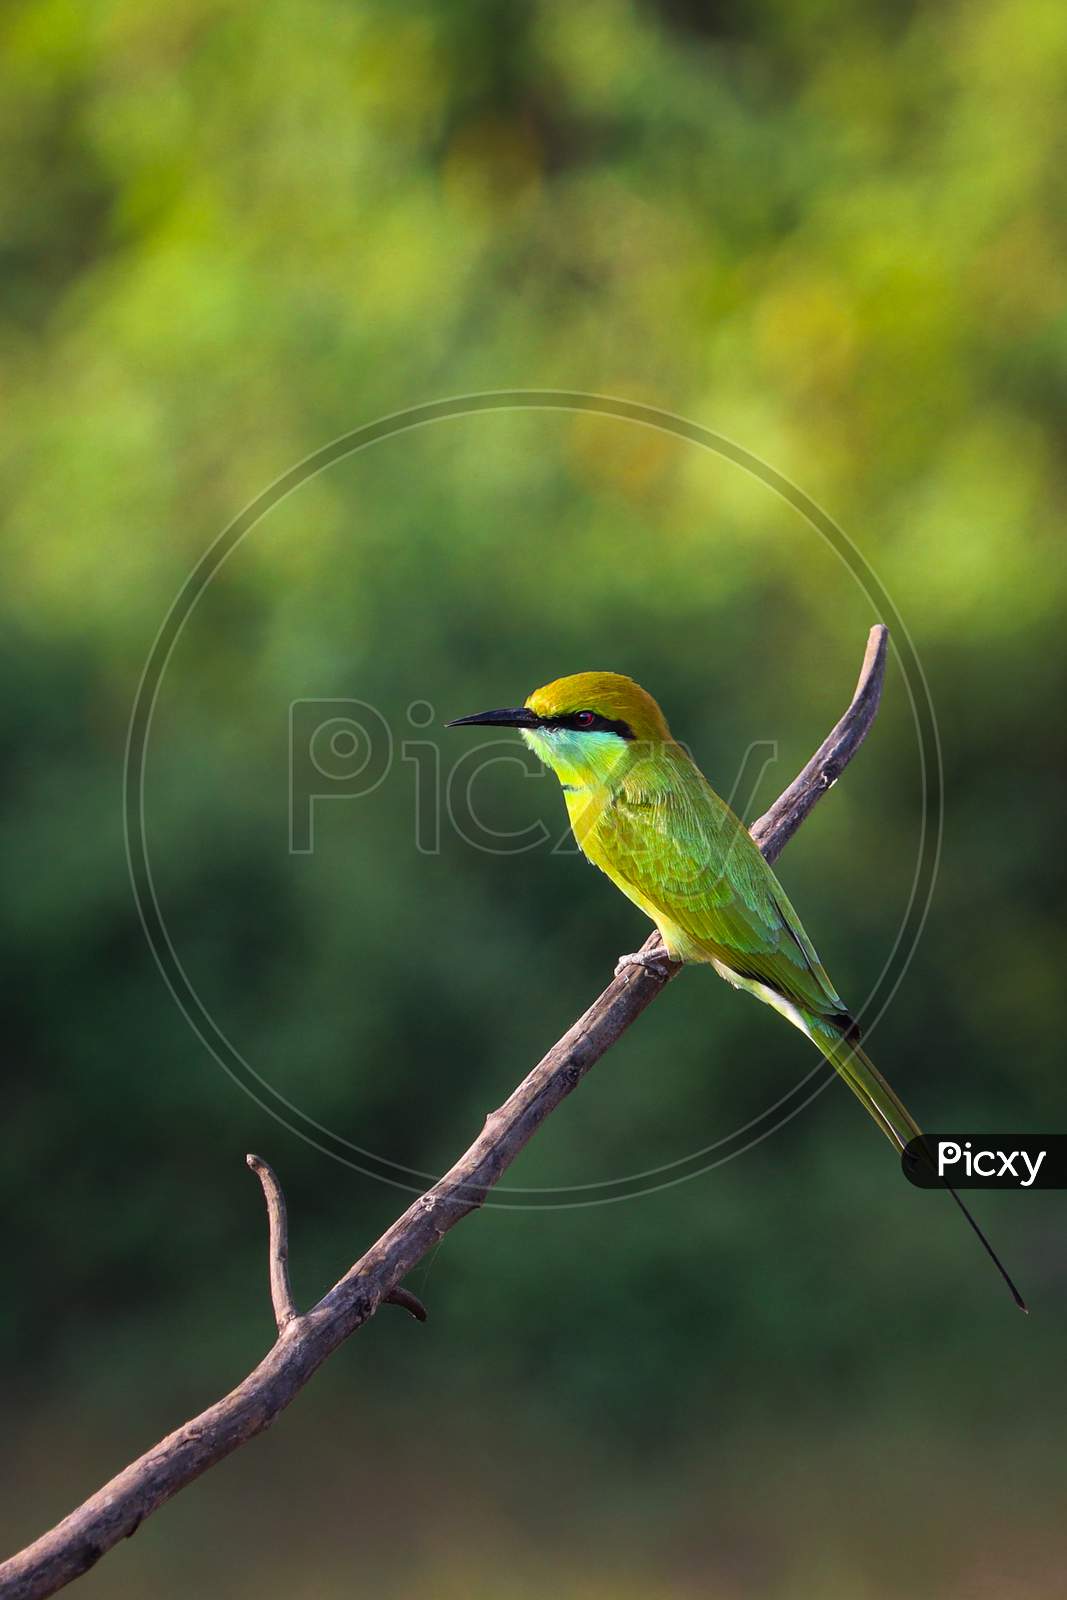 Green Bee-Eater Sitting On Wire With Green Background.